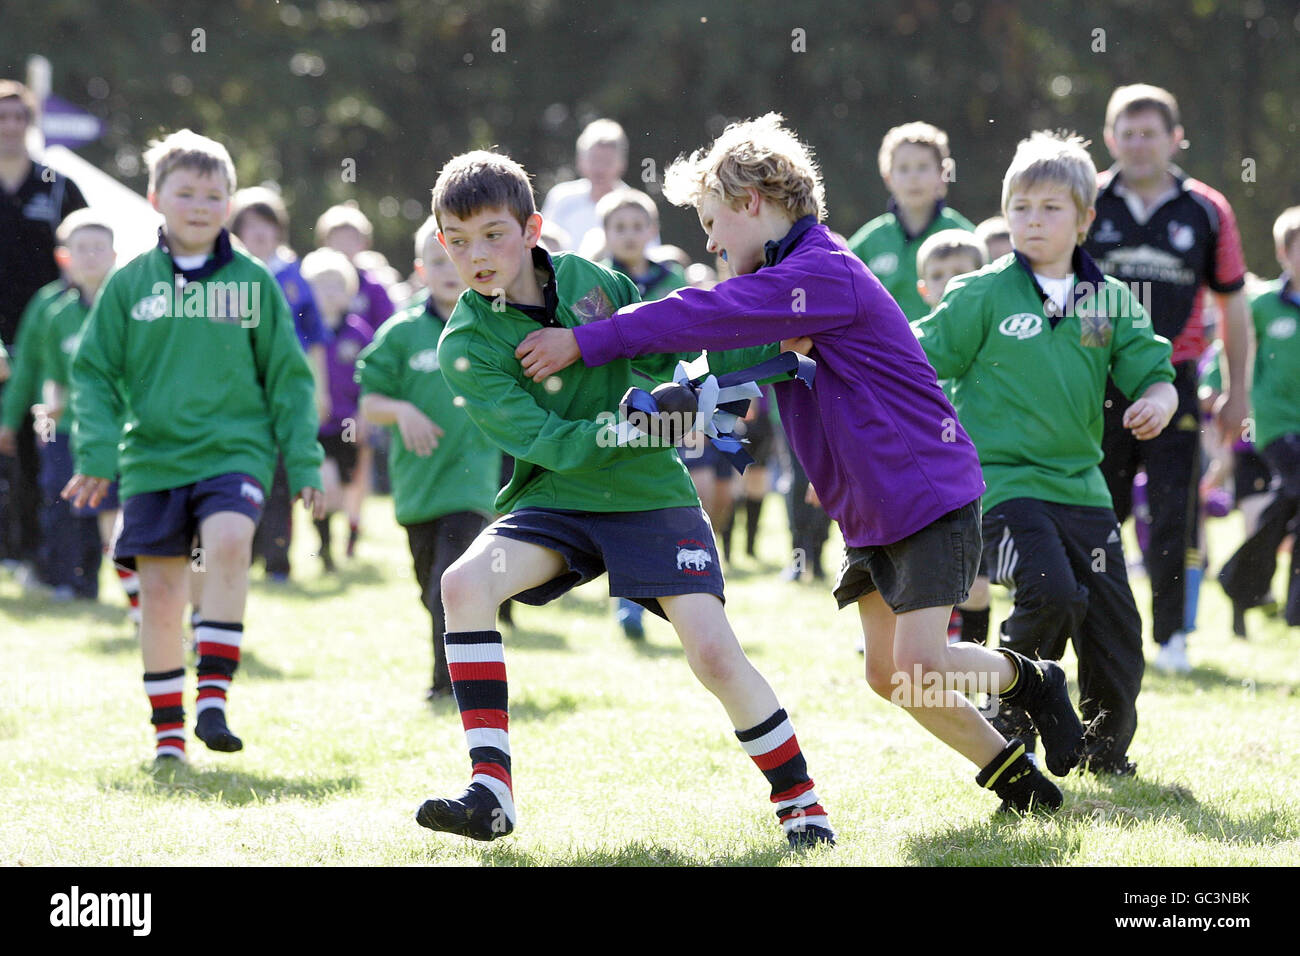 Local schoolchildren in teams of Selkirkshire (green) and Roxburghshire (purple) take part in a re-enactment of the 1815 Carterhaugh Ba' game, that some historians believe was a forerunner to the game of rugby, at Bowhill, Selkirkshire. Stock Photo